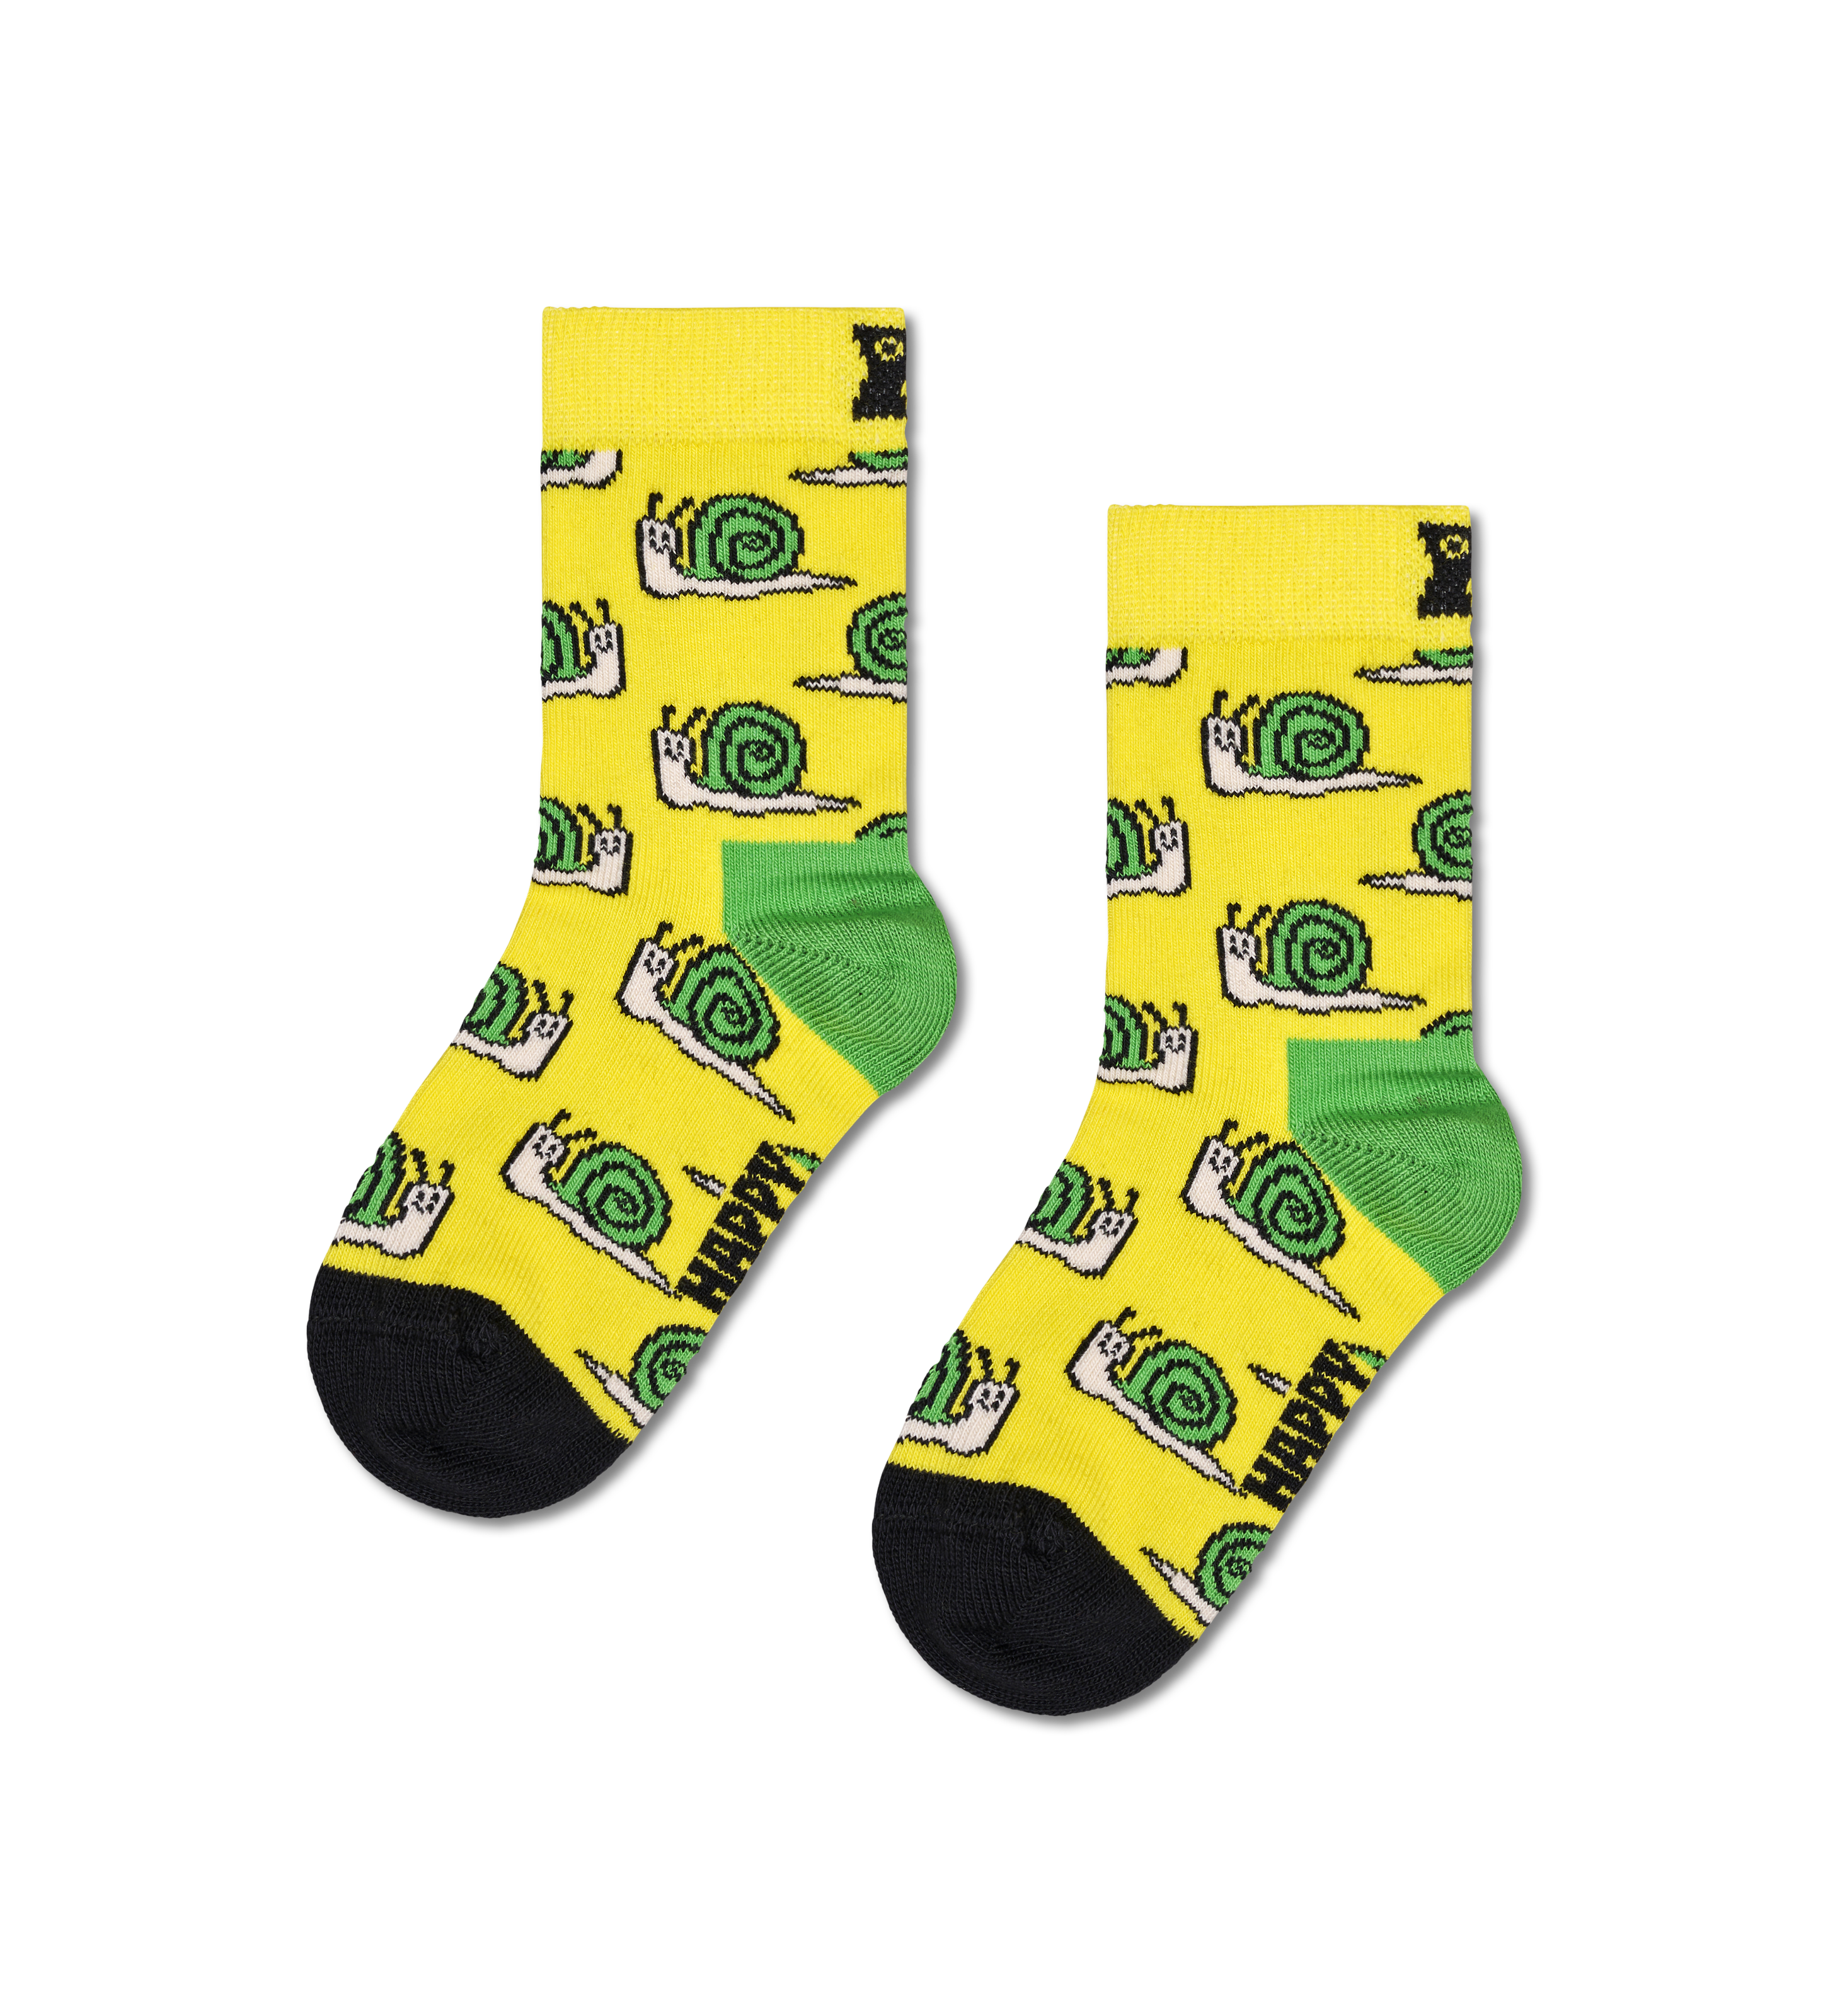 Happy Socks – Frog and Gnome